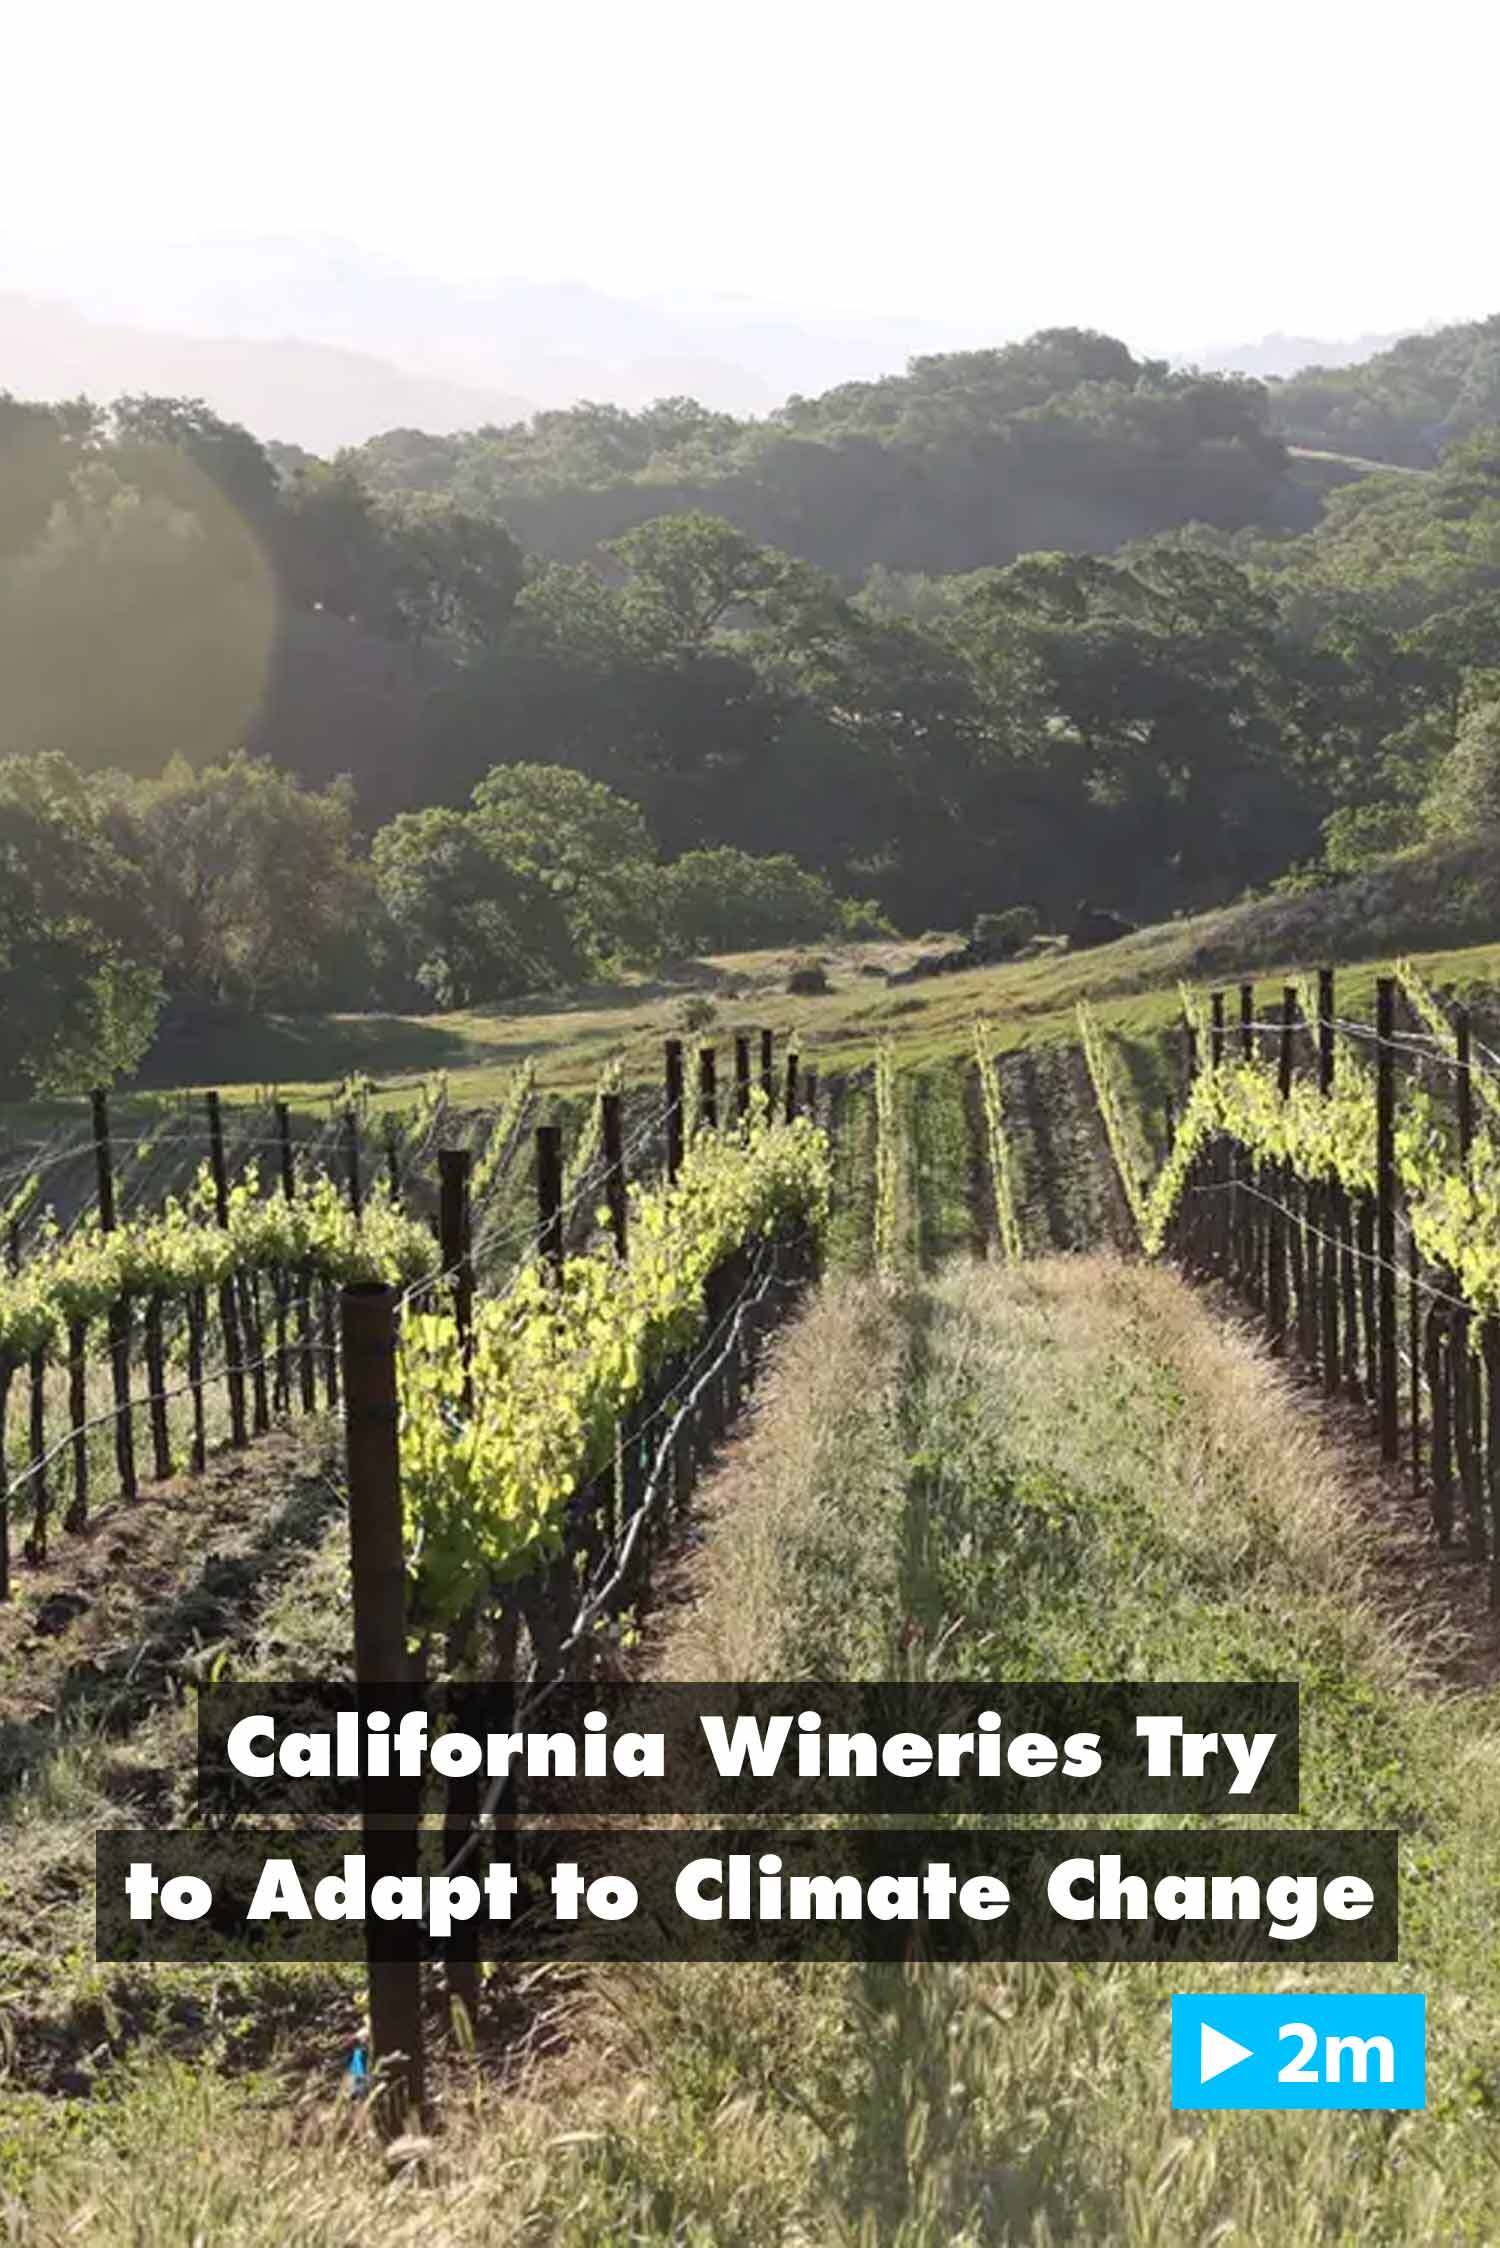 California wineries try to adapt to climate change